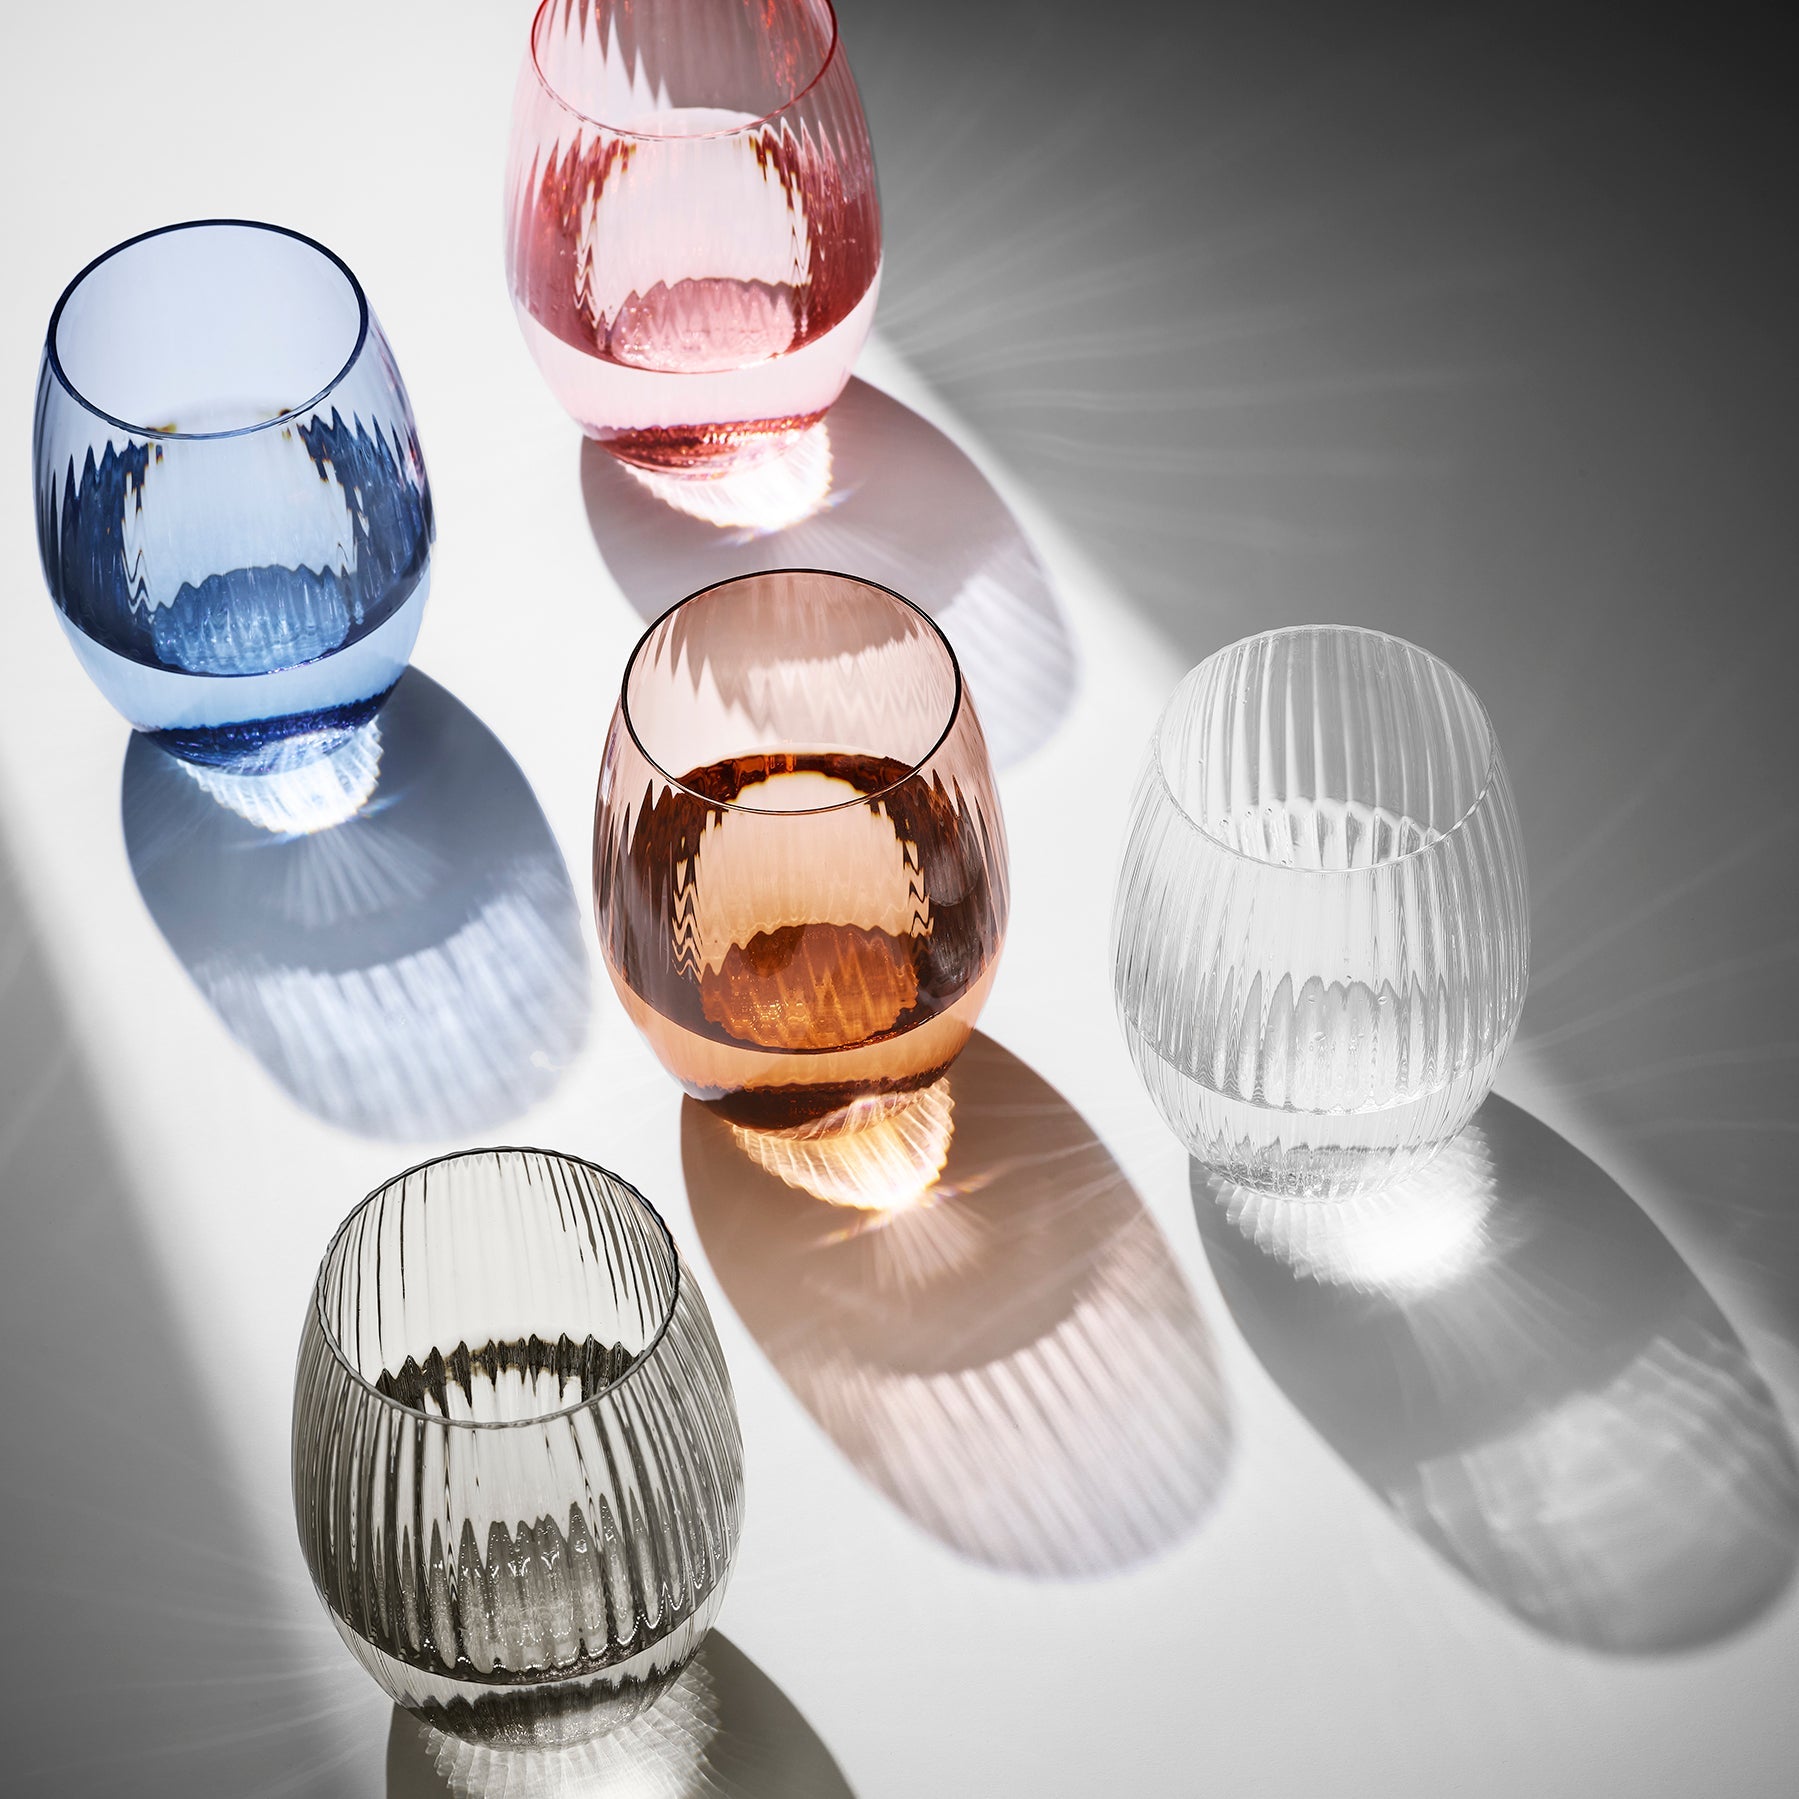 A set of colored wine glasses on a white surface.